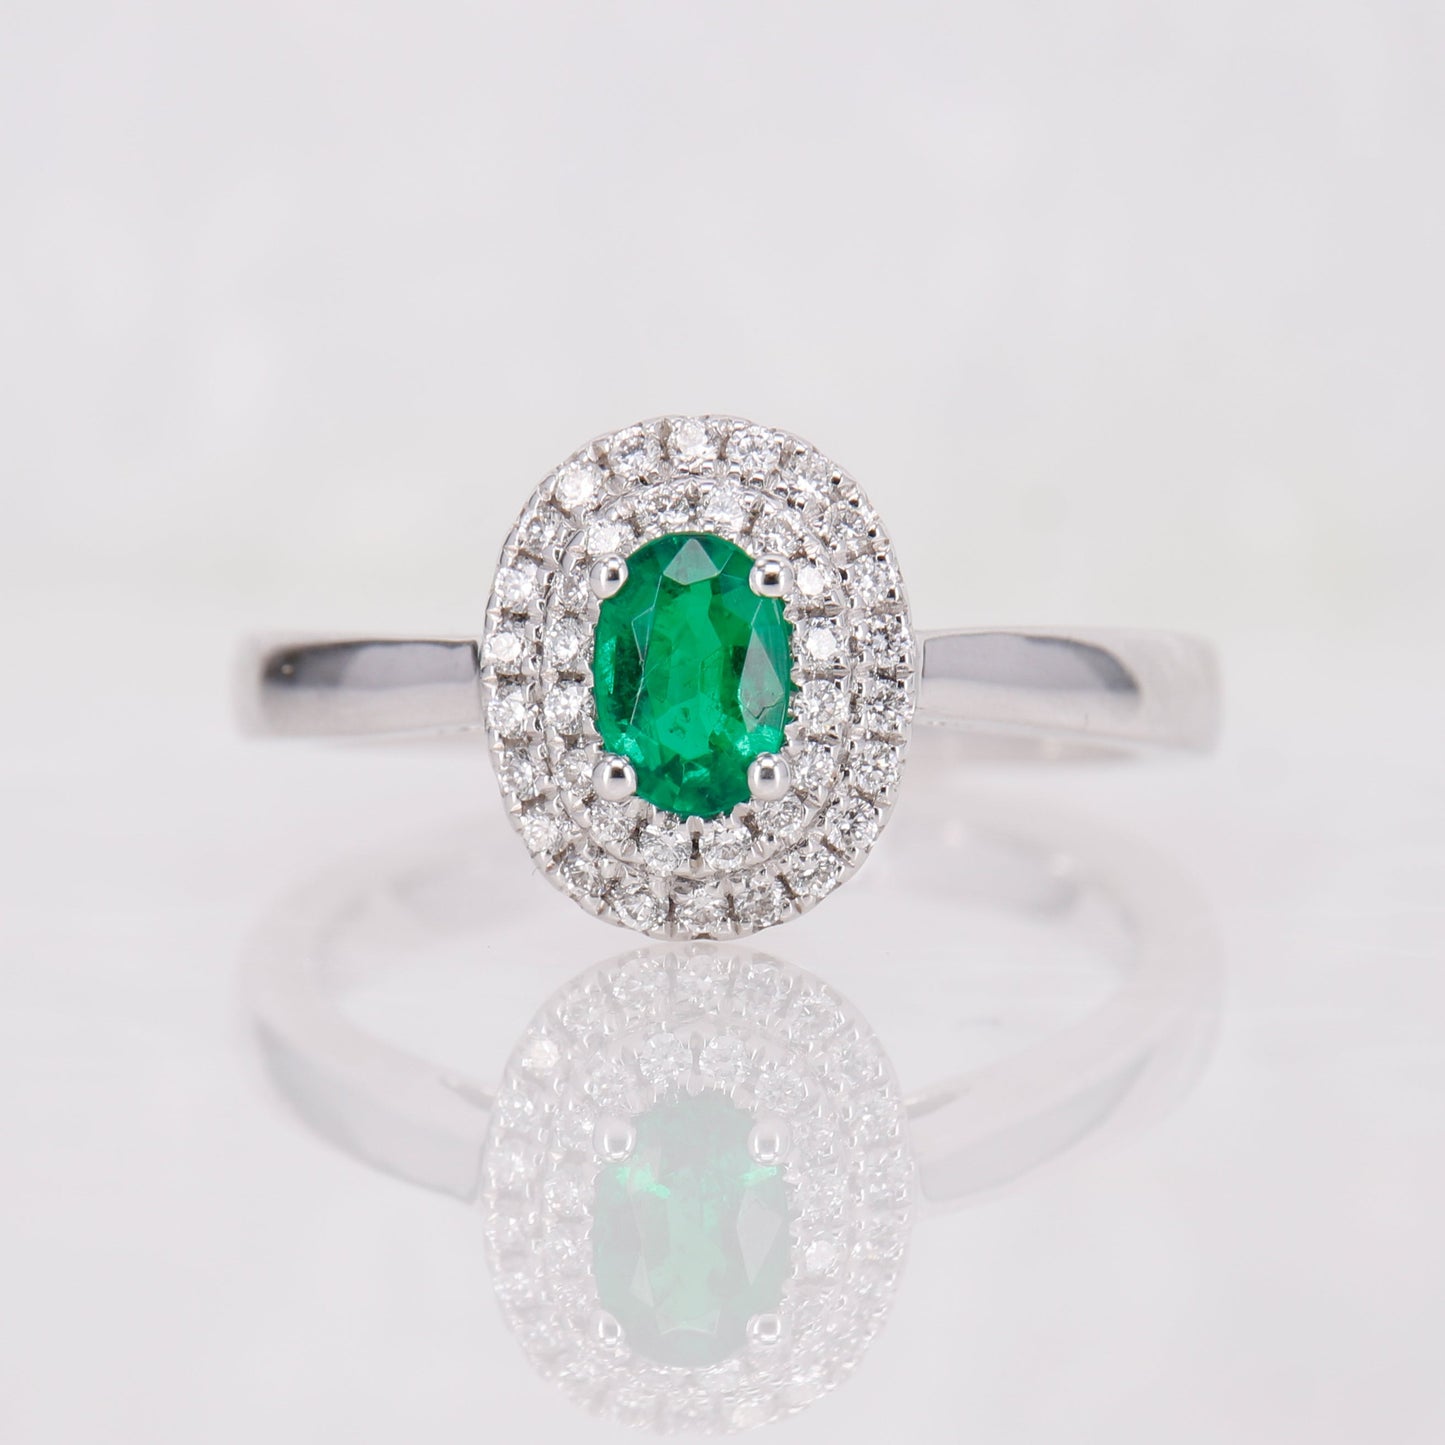 Oval Emerald Cut and double Halo Diamond Ring, set in 18ct White gold. 